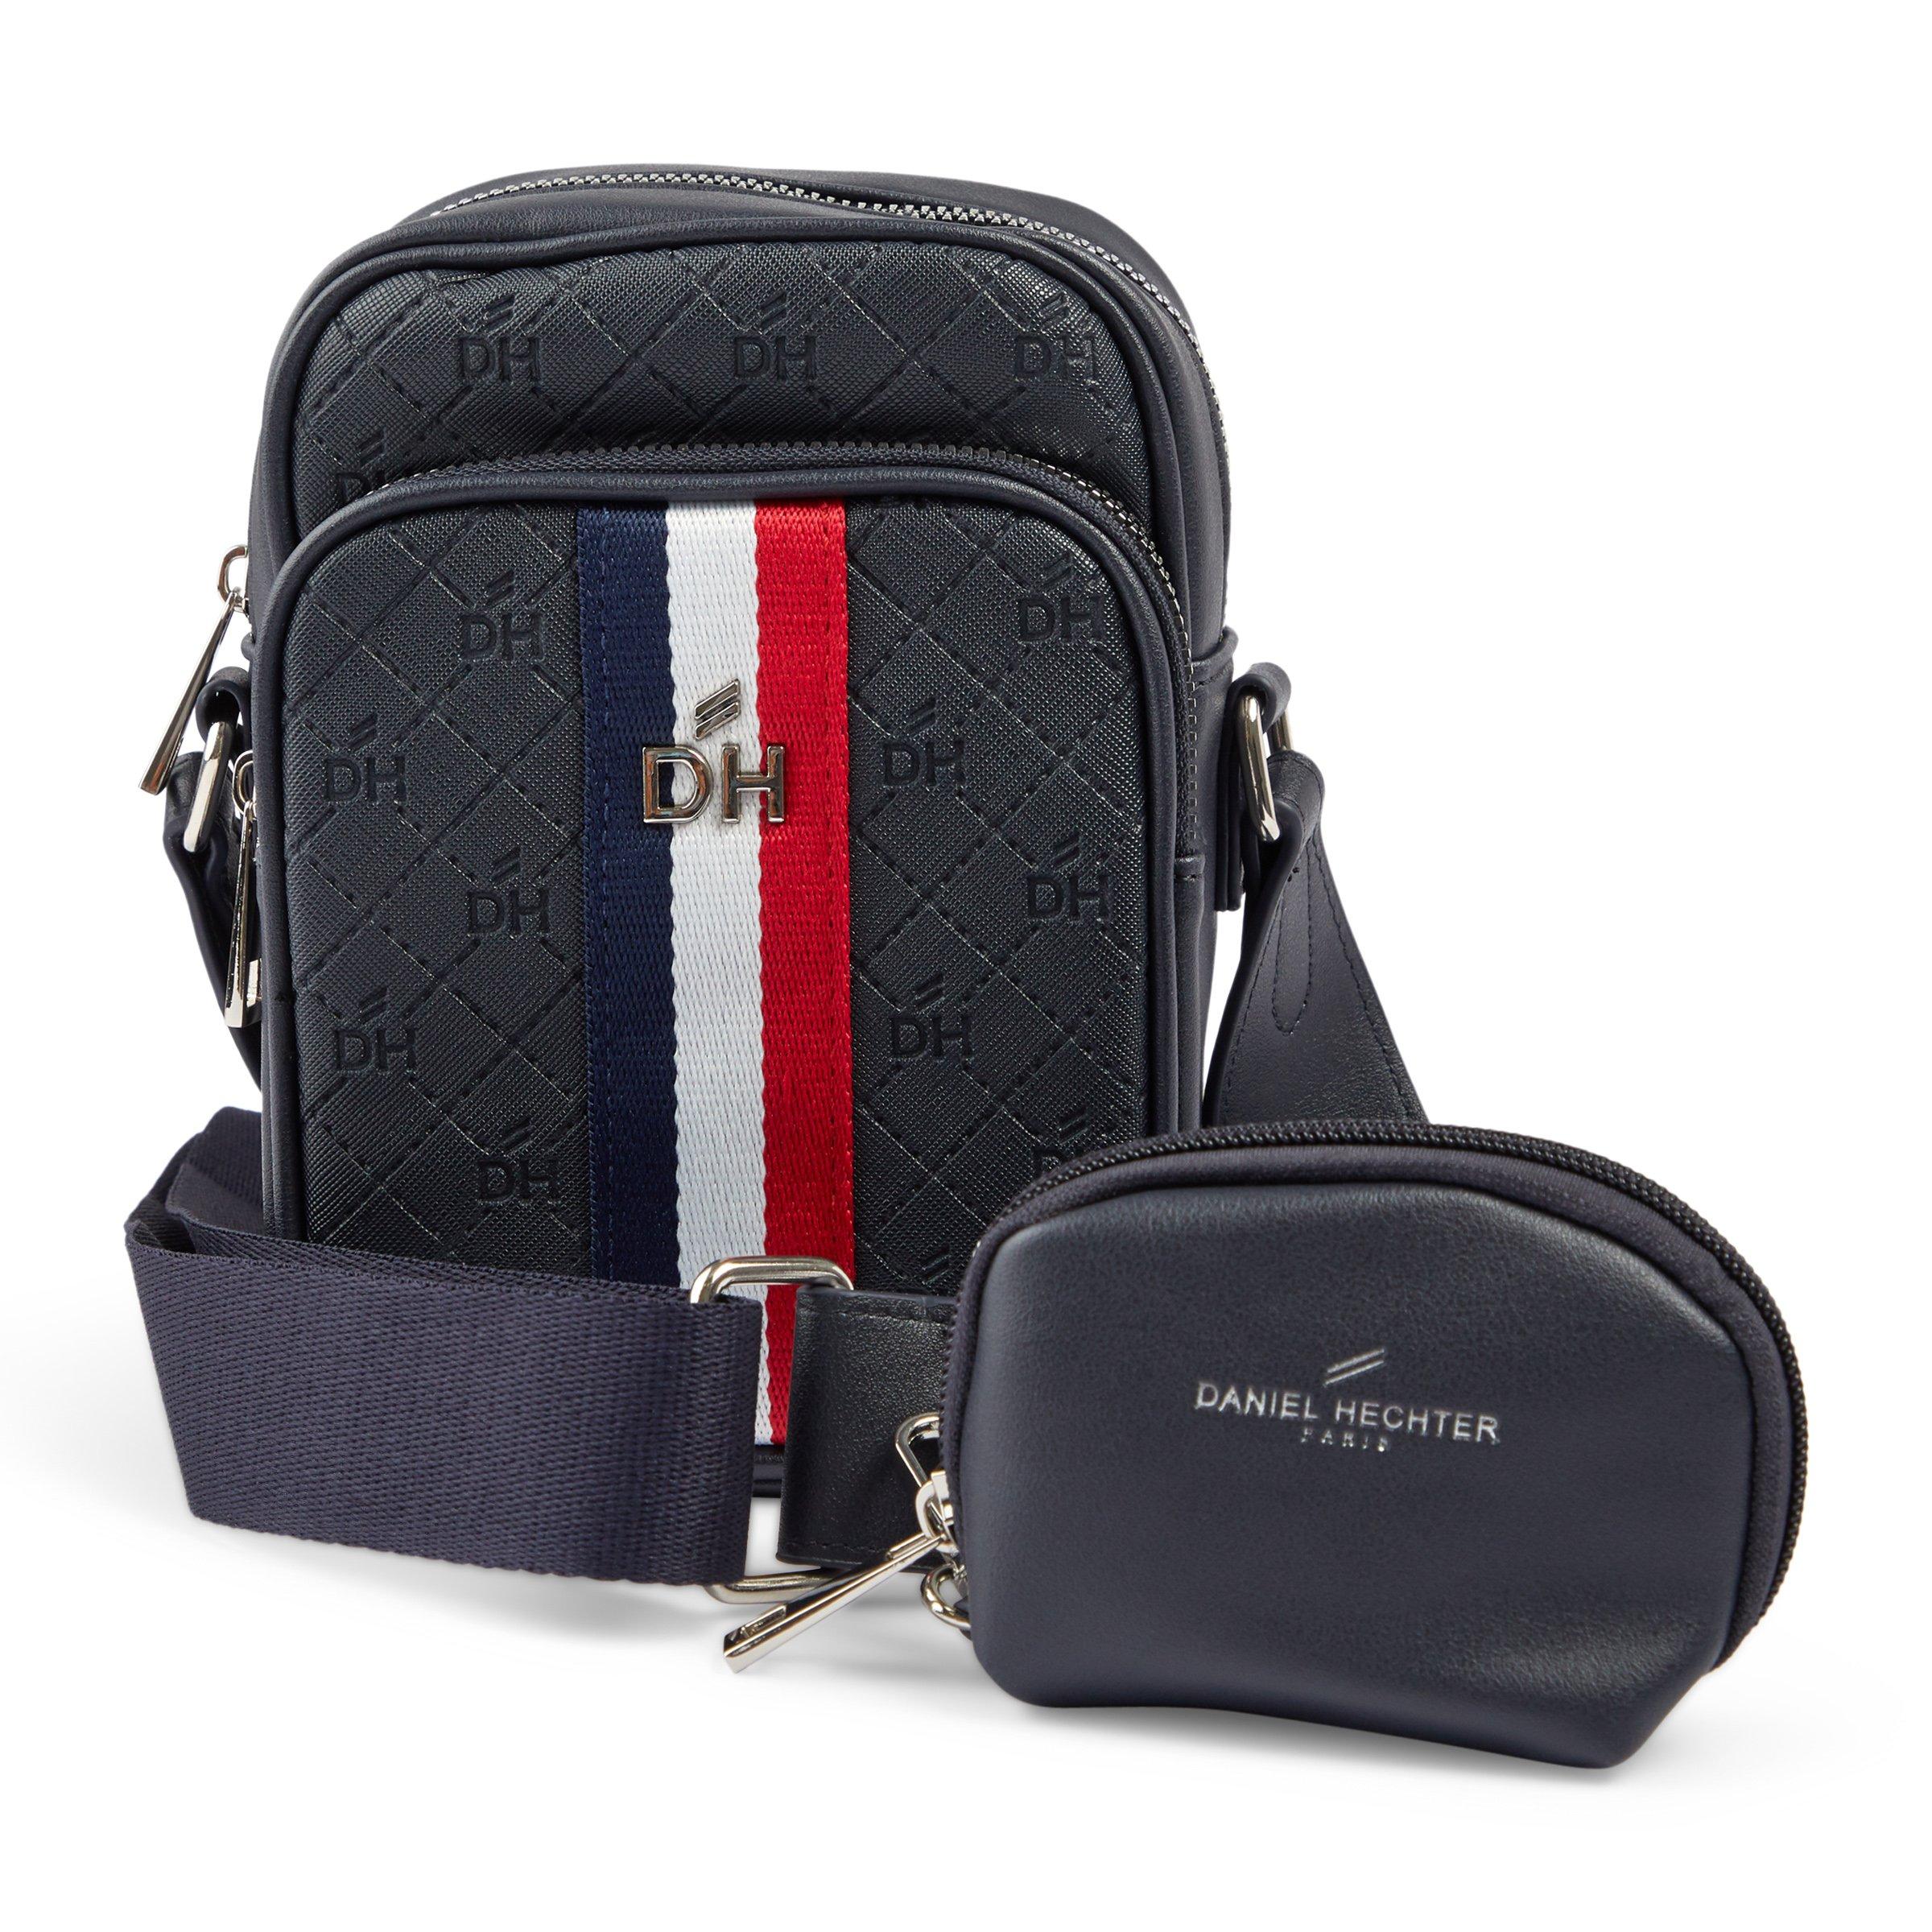 Navy Crossbody Bag With Pouch